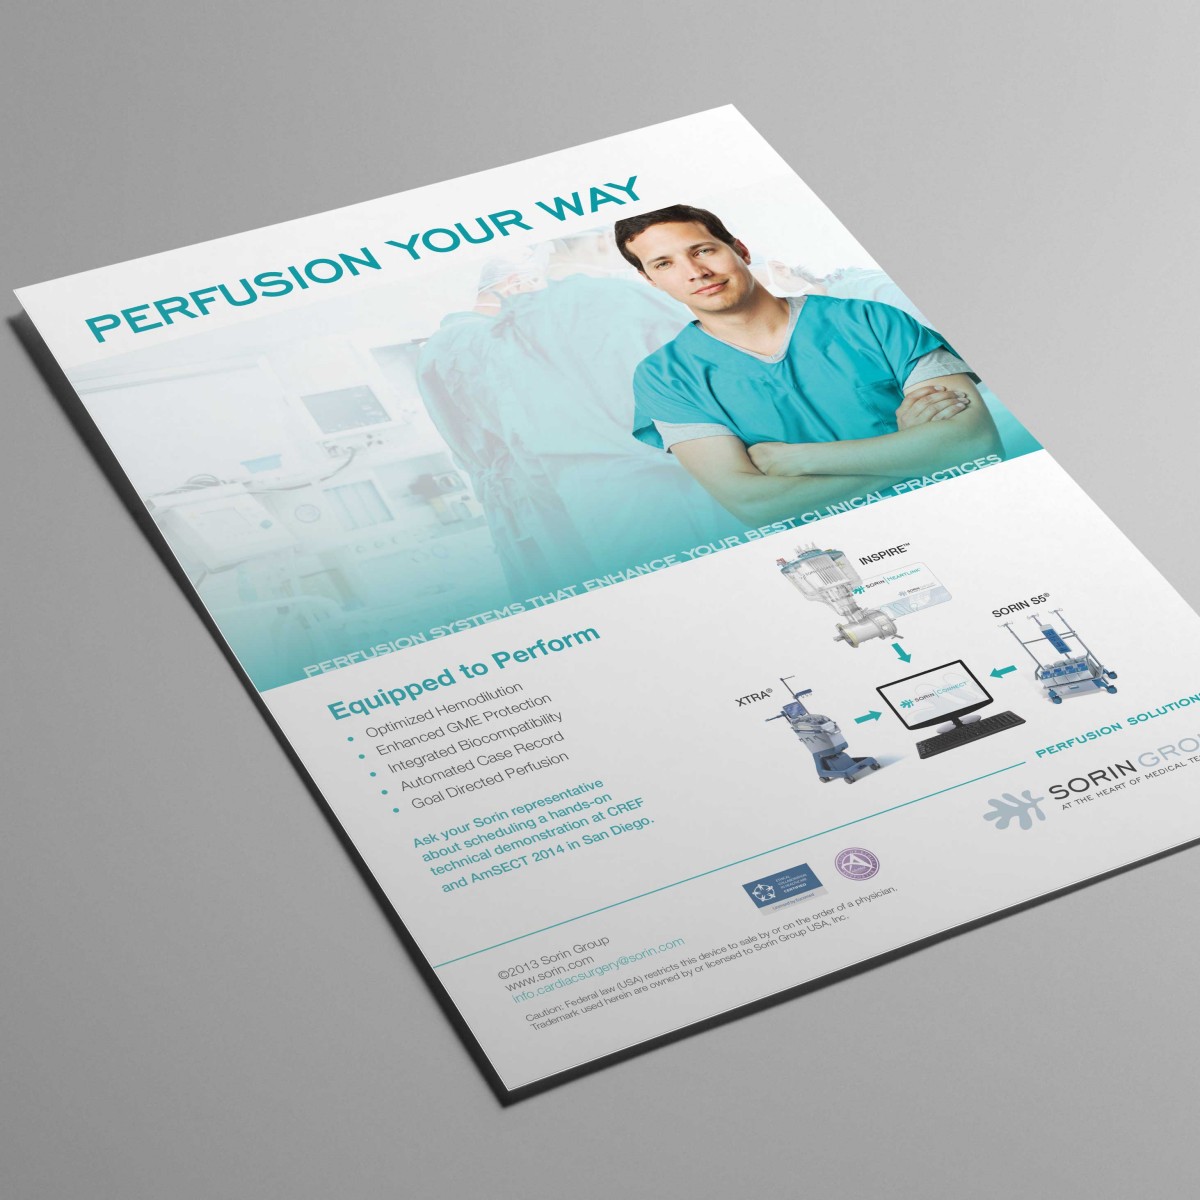 Sorin perfusion product ad